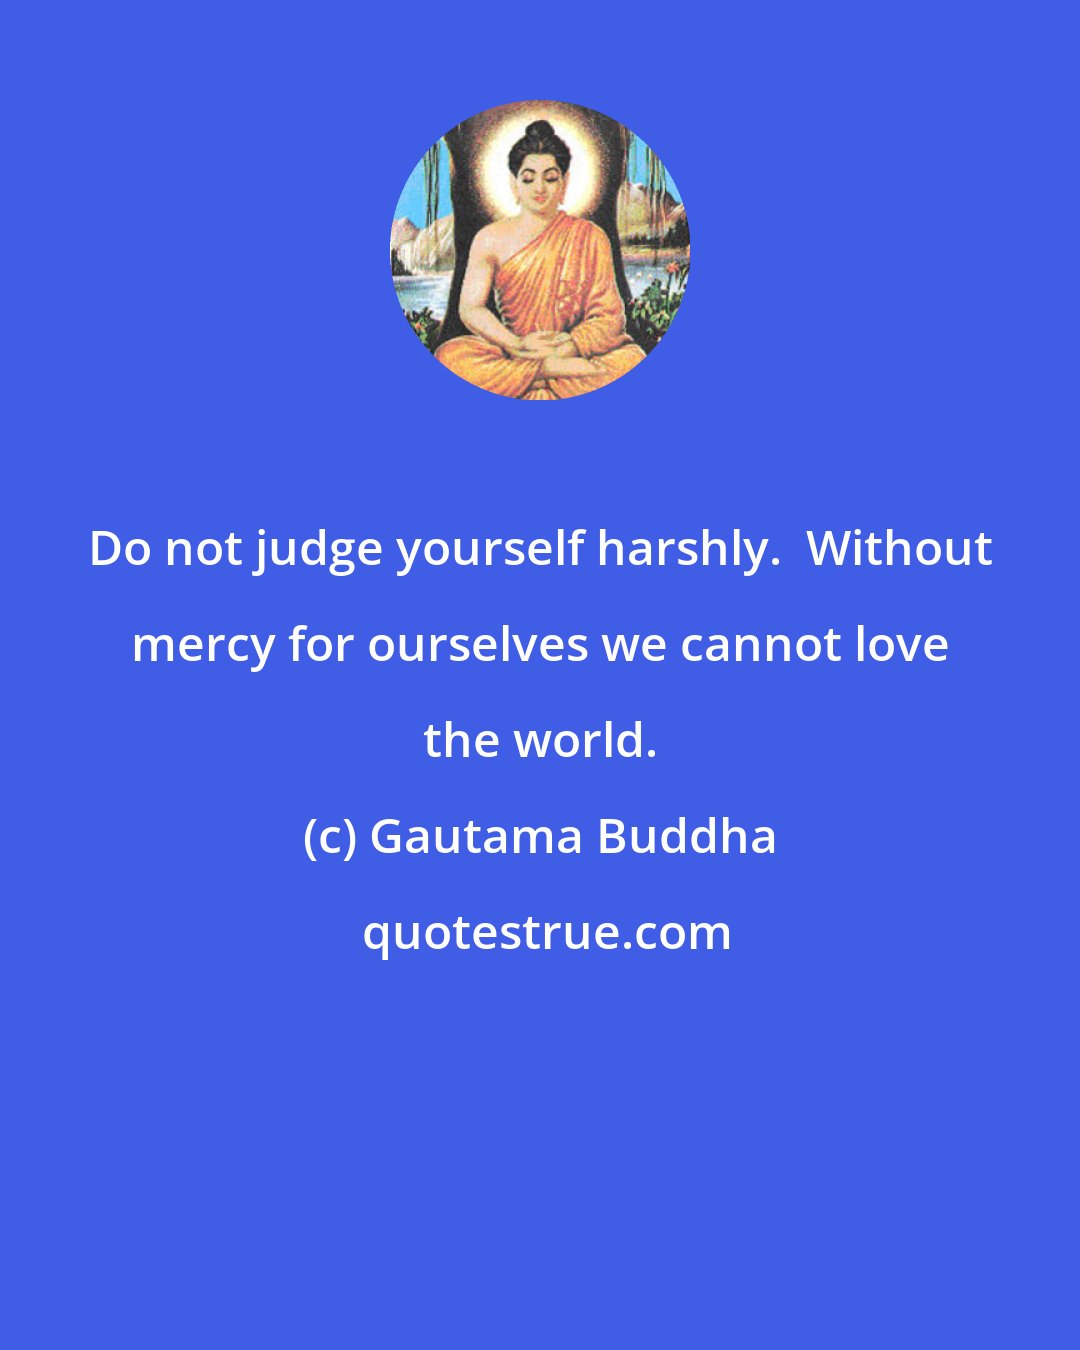 Gautama Buddha: Do not judge yourself harshly.  Without mercy for ourselves we cannot love the world.